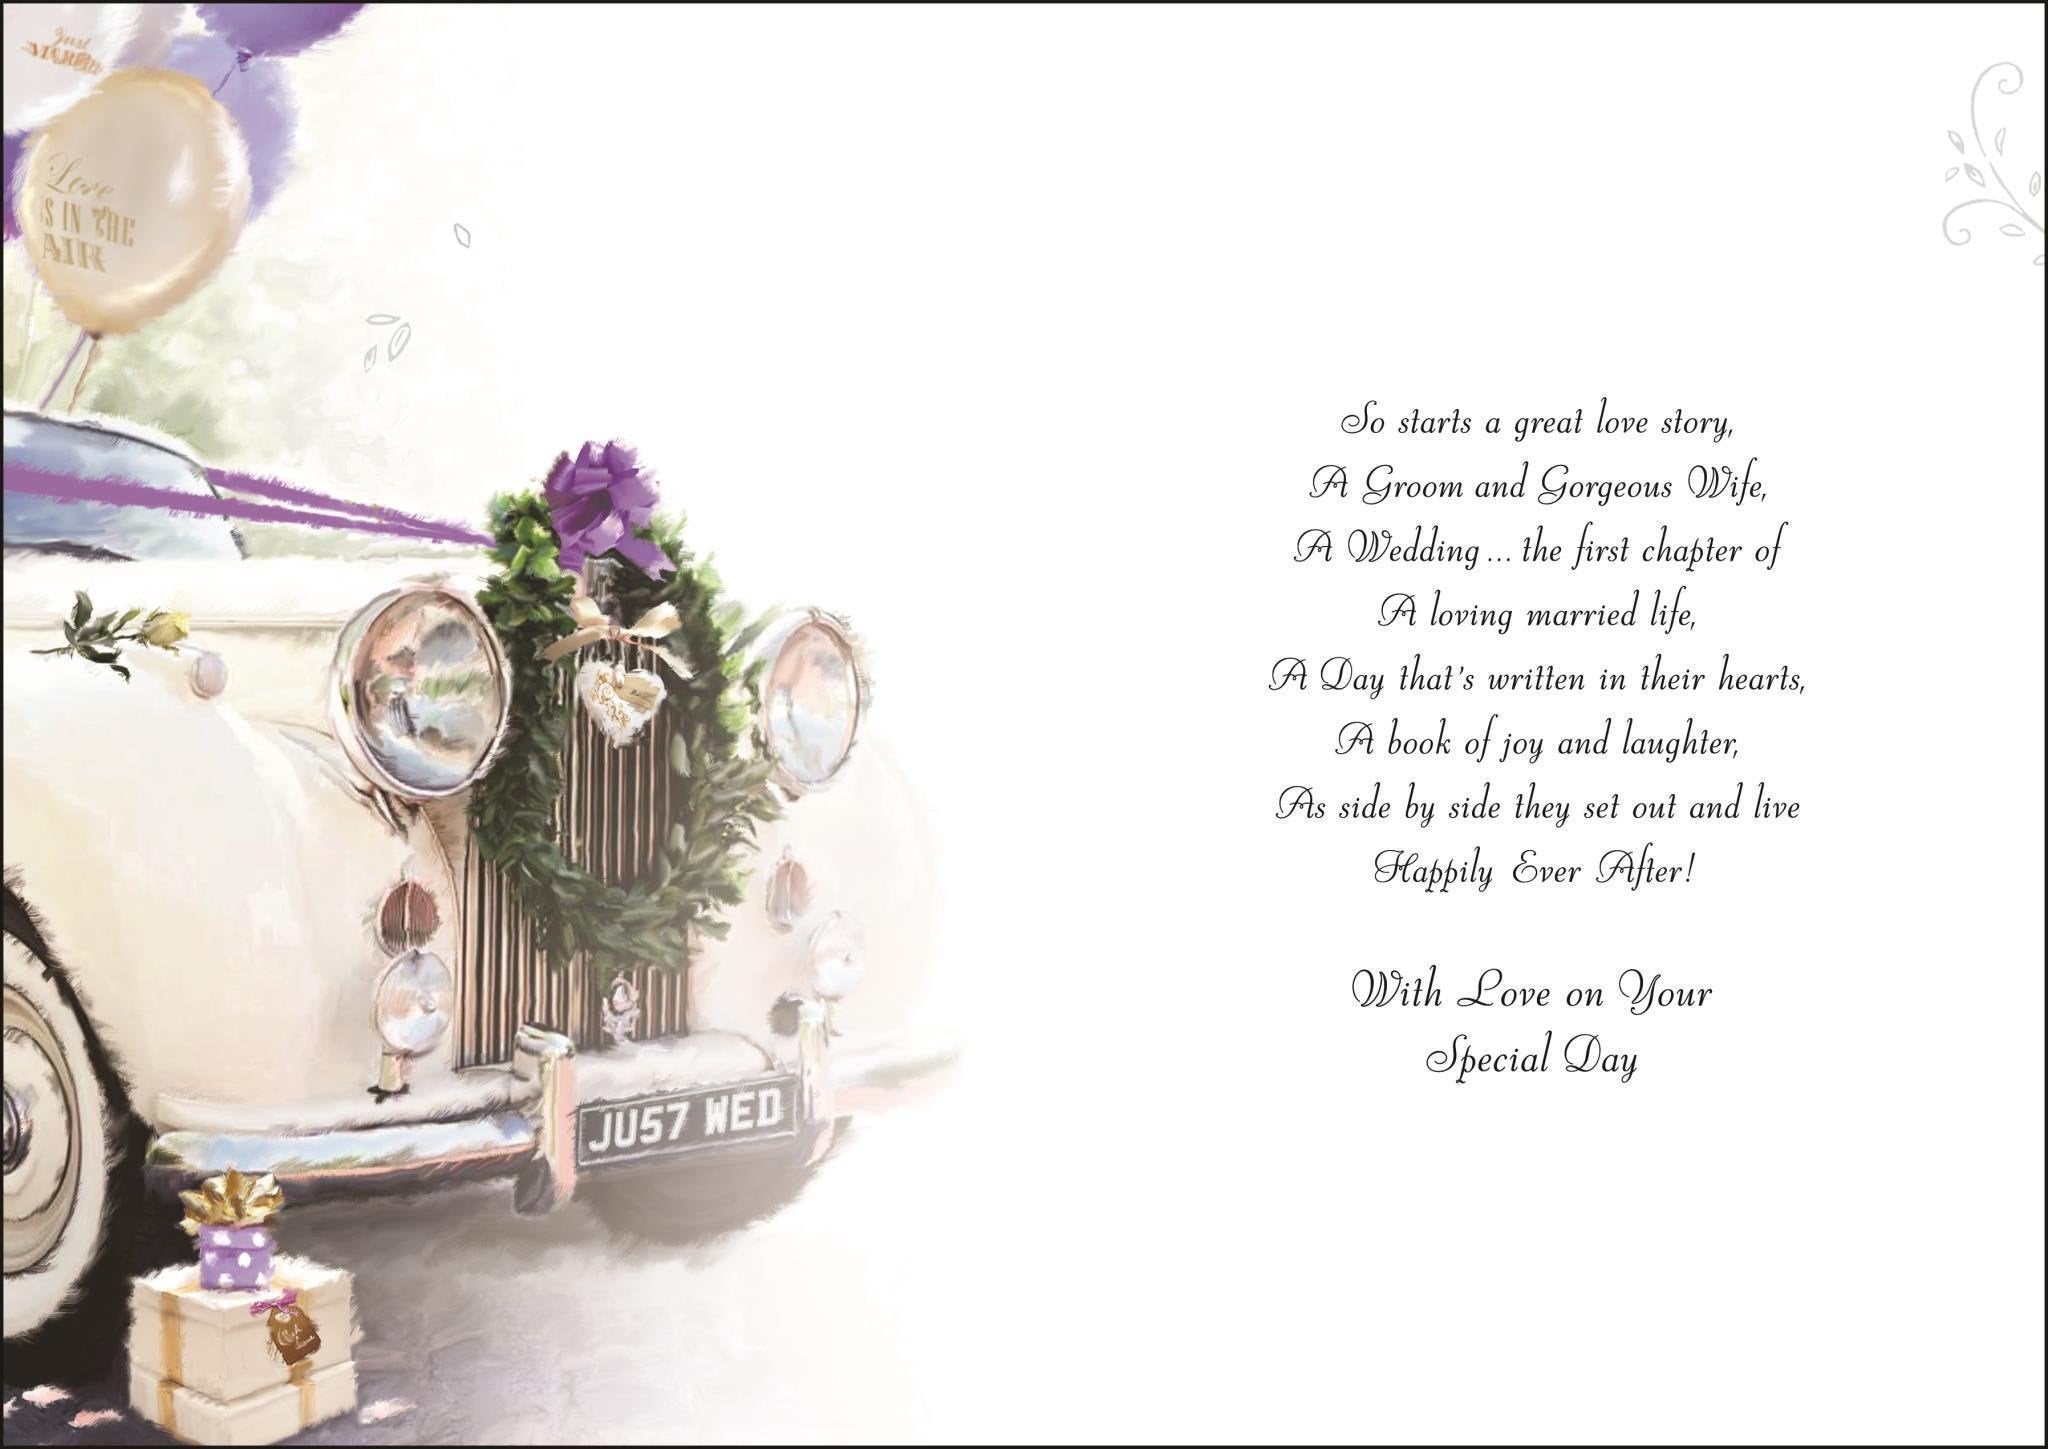 Inside of Wedding Brother & SIL White Car Greetings Card